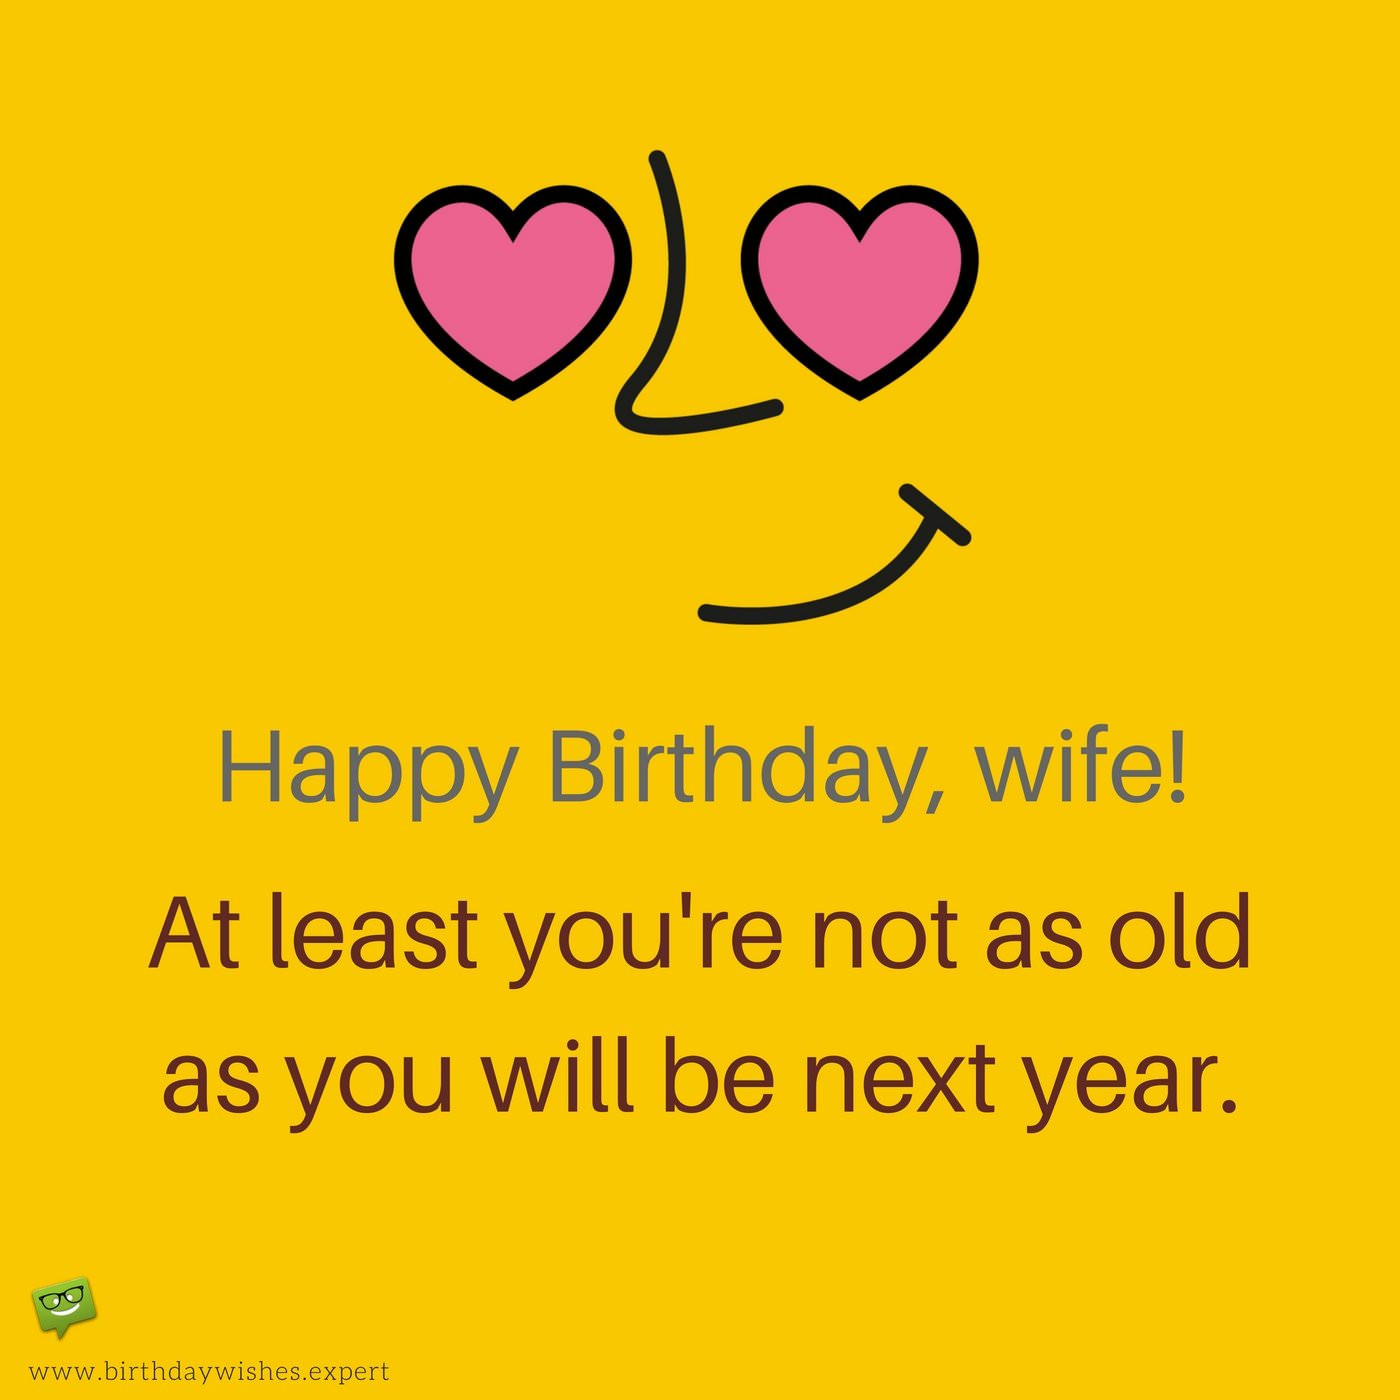 Birthday Funny Wishes
 The Funniest Wishes to Make your Wife Smile on her Birthday